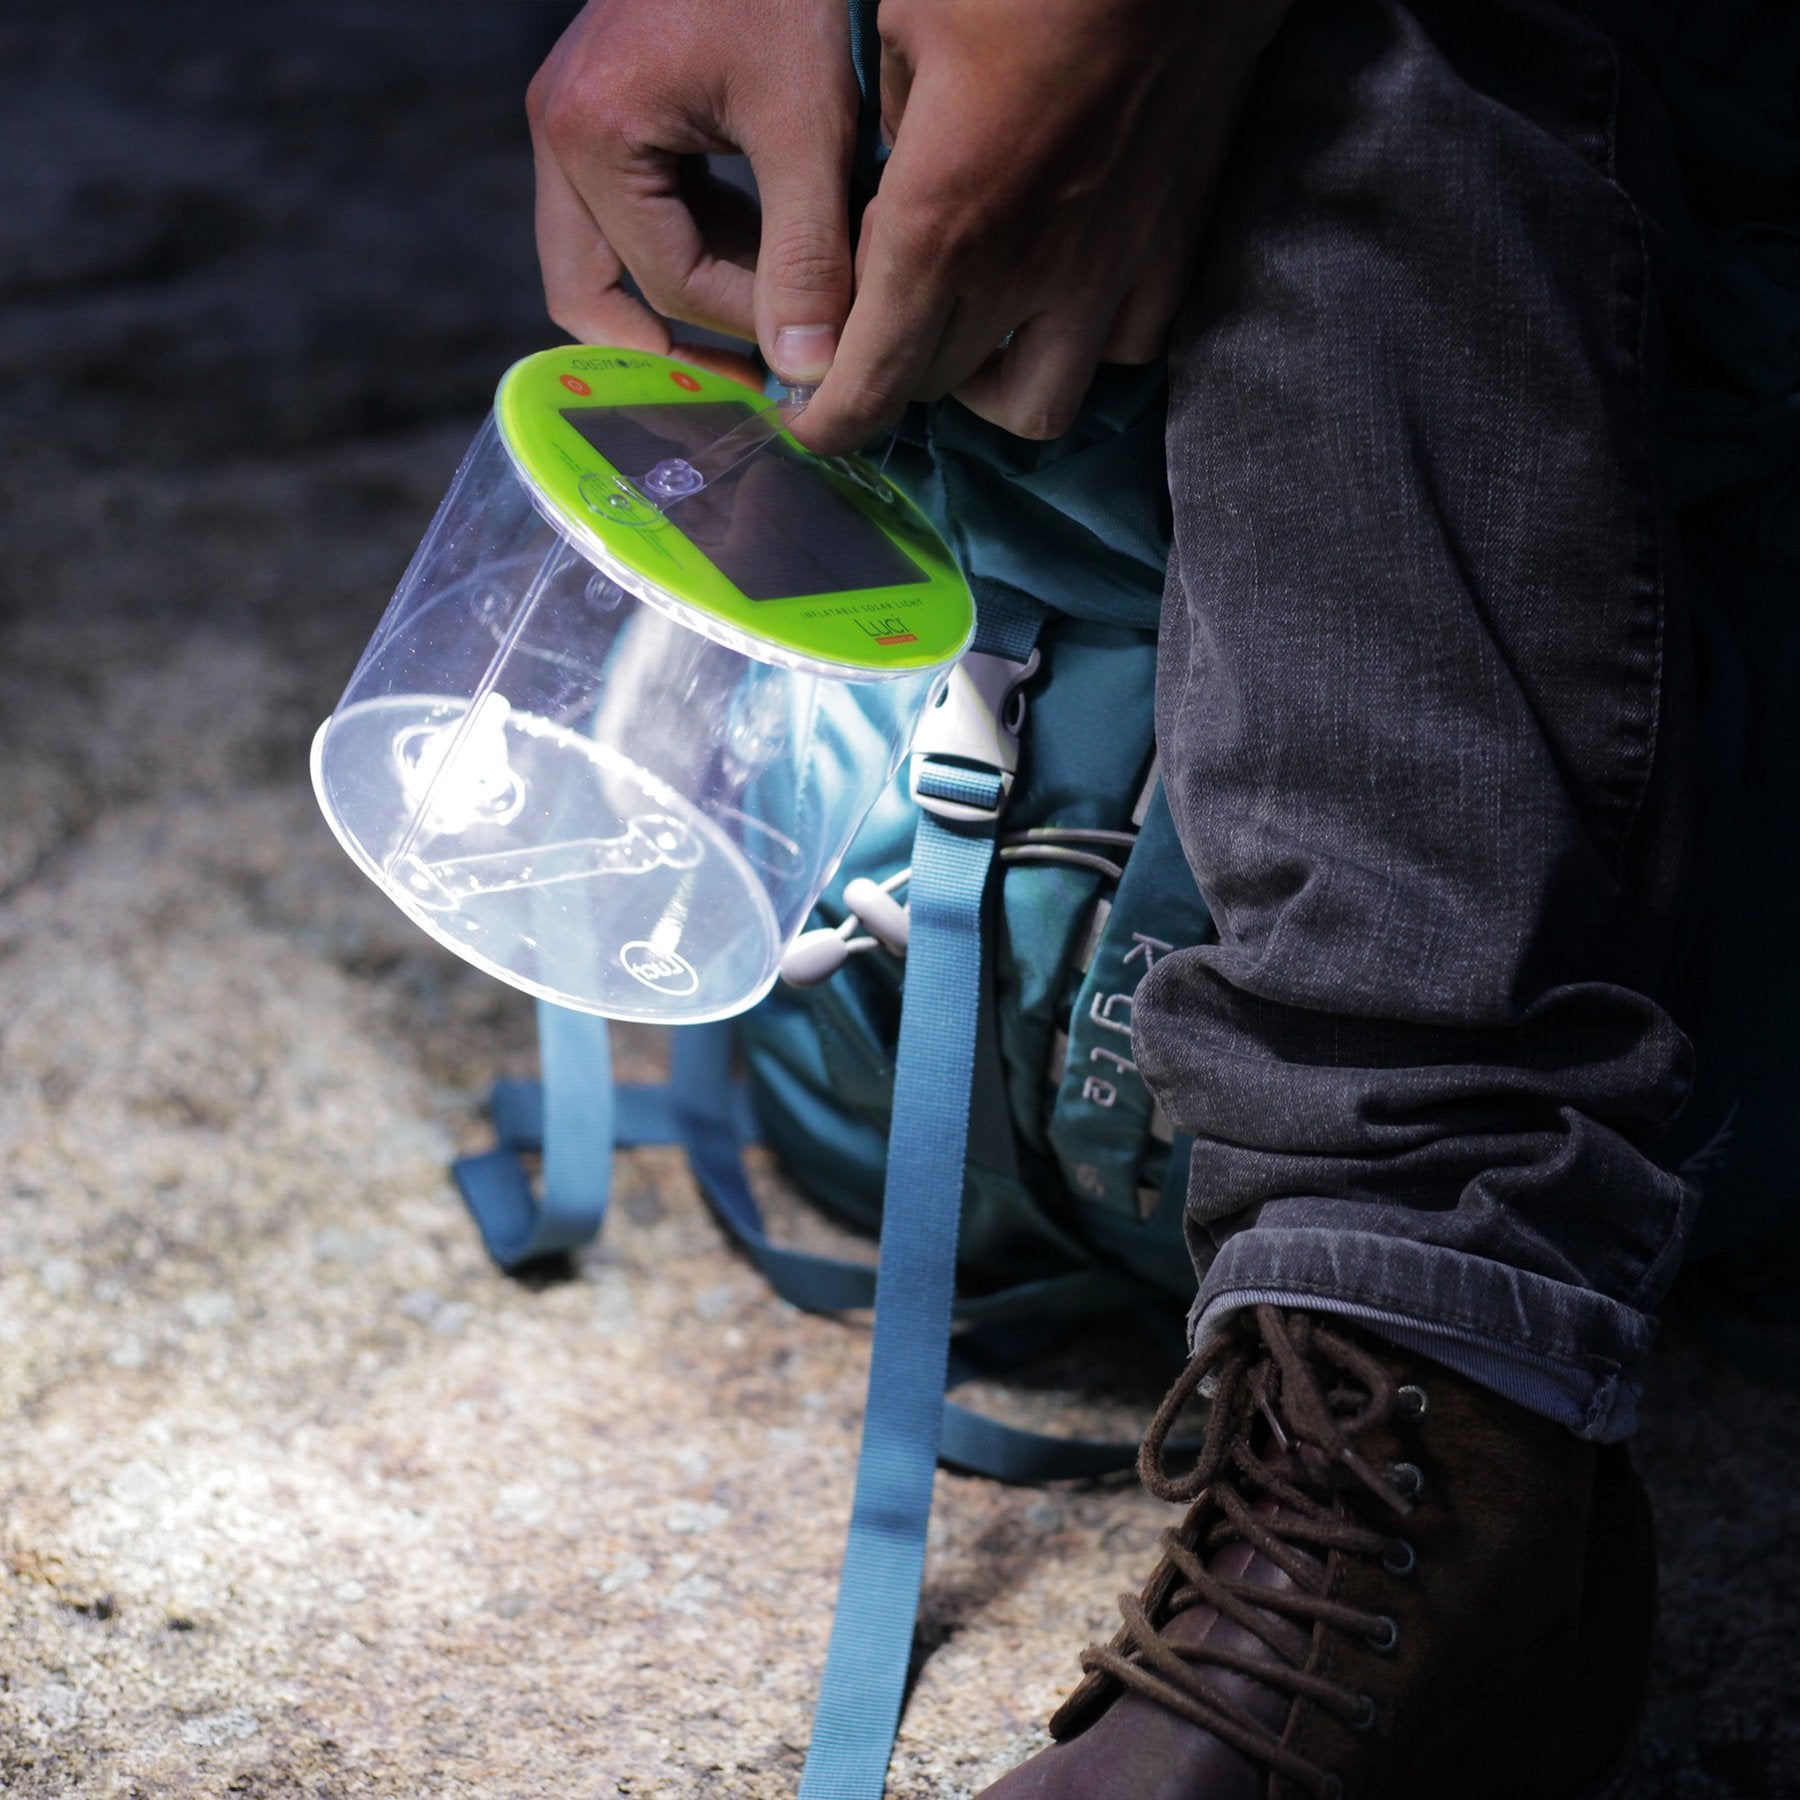 attaching a lantern to a blue backpack